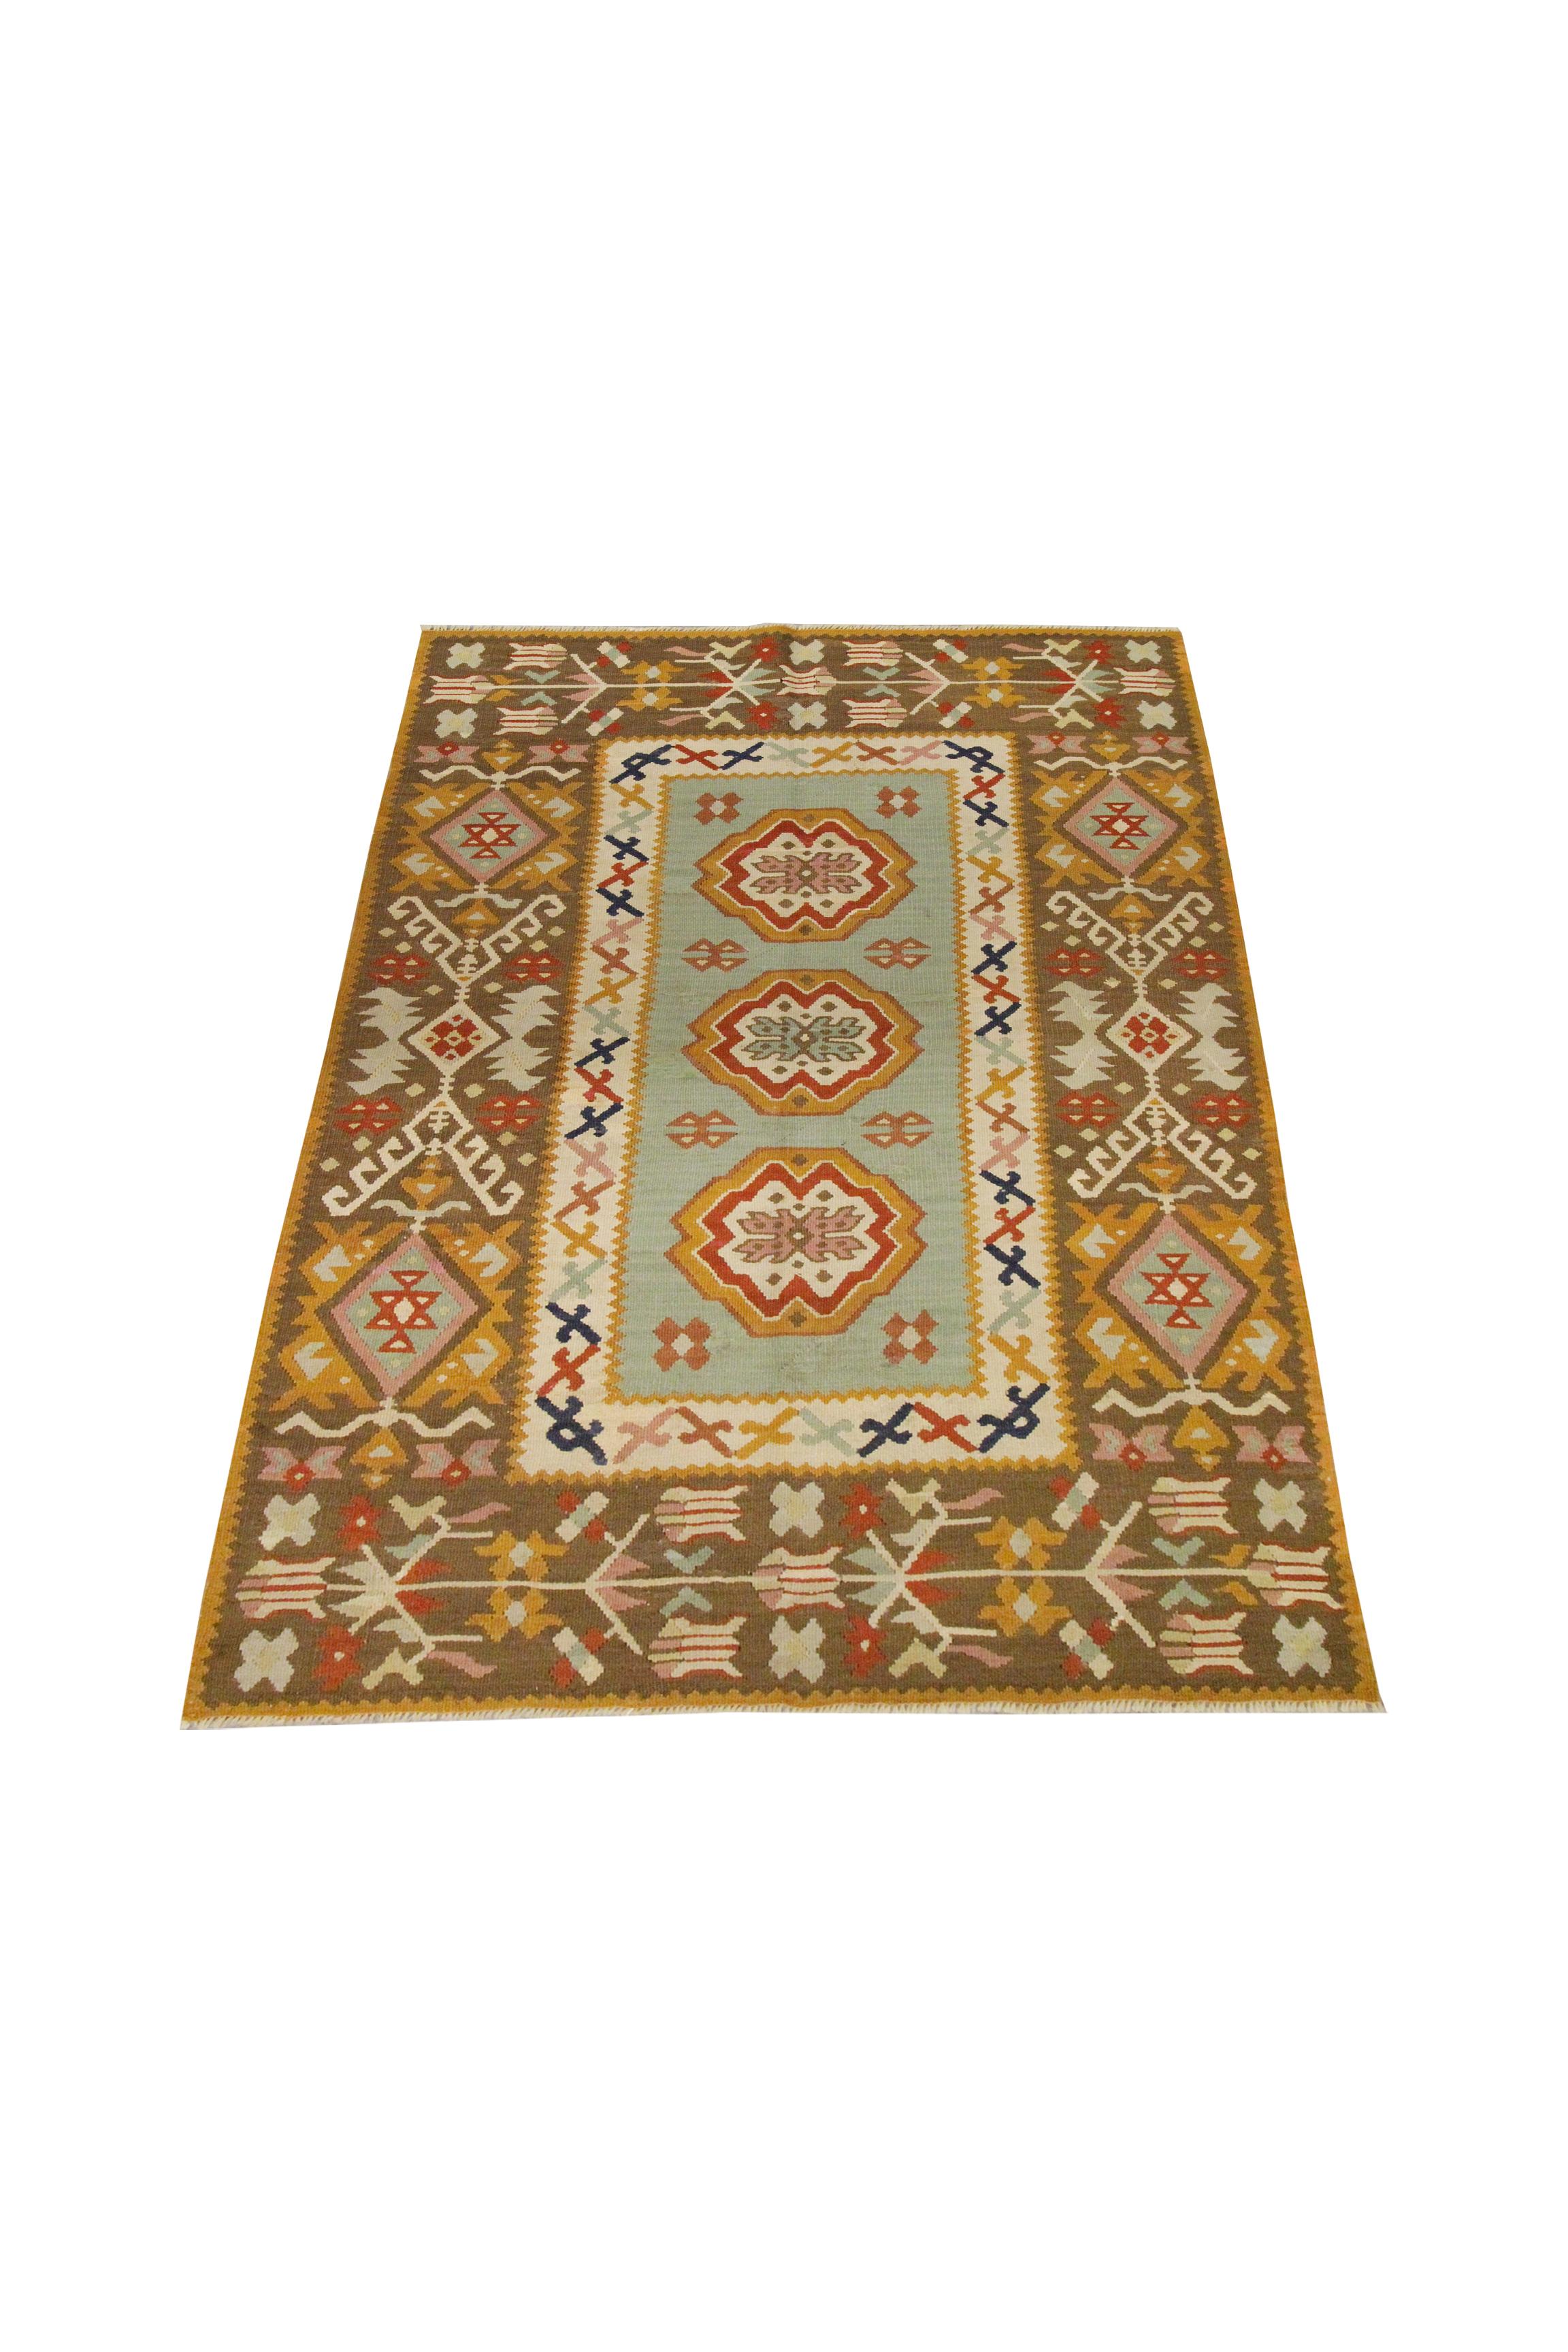 Symmetrical and sophisticated, this Oriental Turkish Kilim has been woven in Pirot with a bold geometric design. The central design features a blue background with mustard, pink and red accents that make up the trio of motifs that run through the